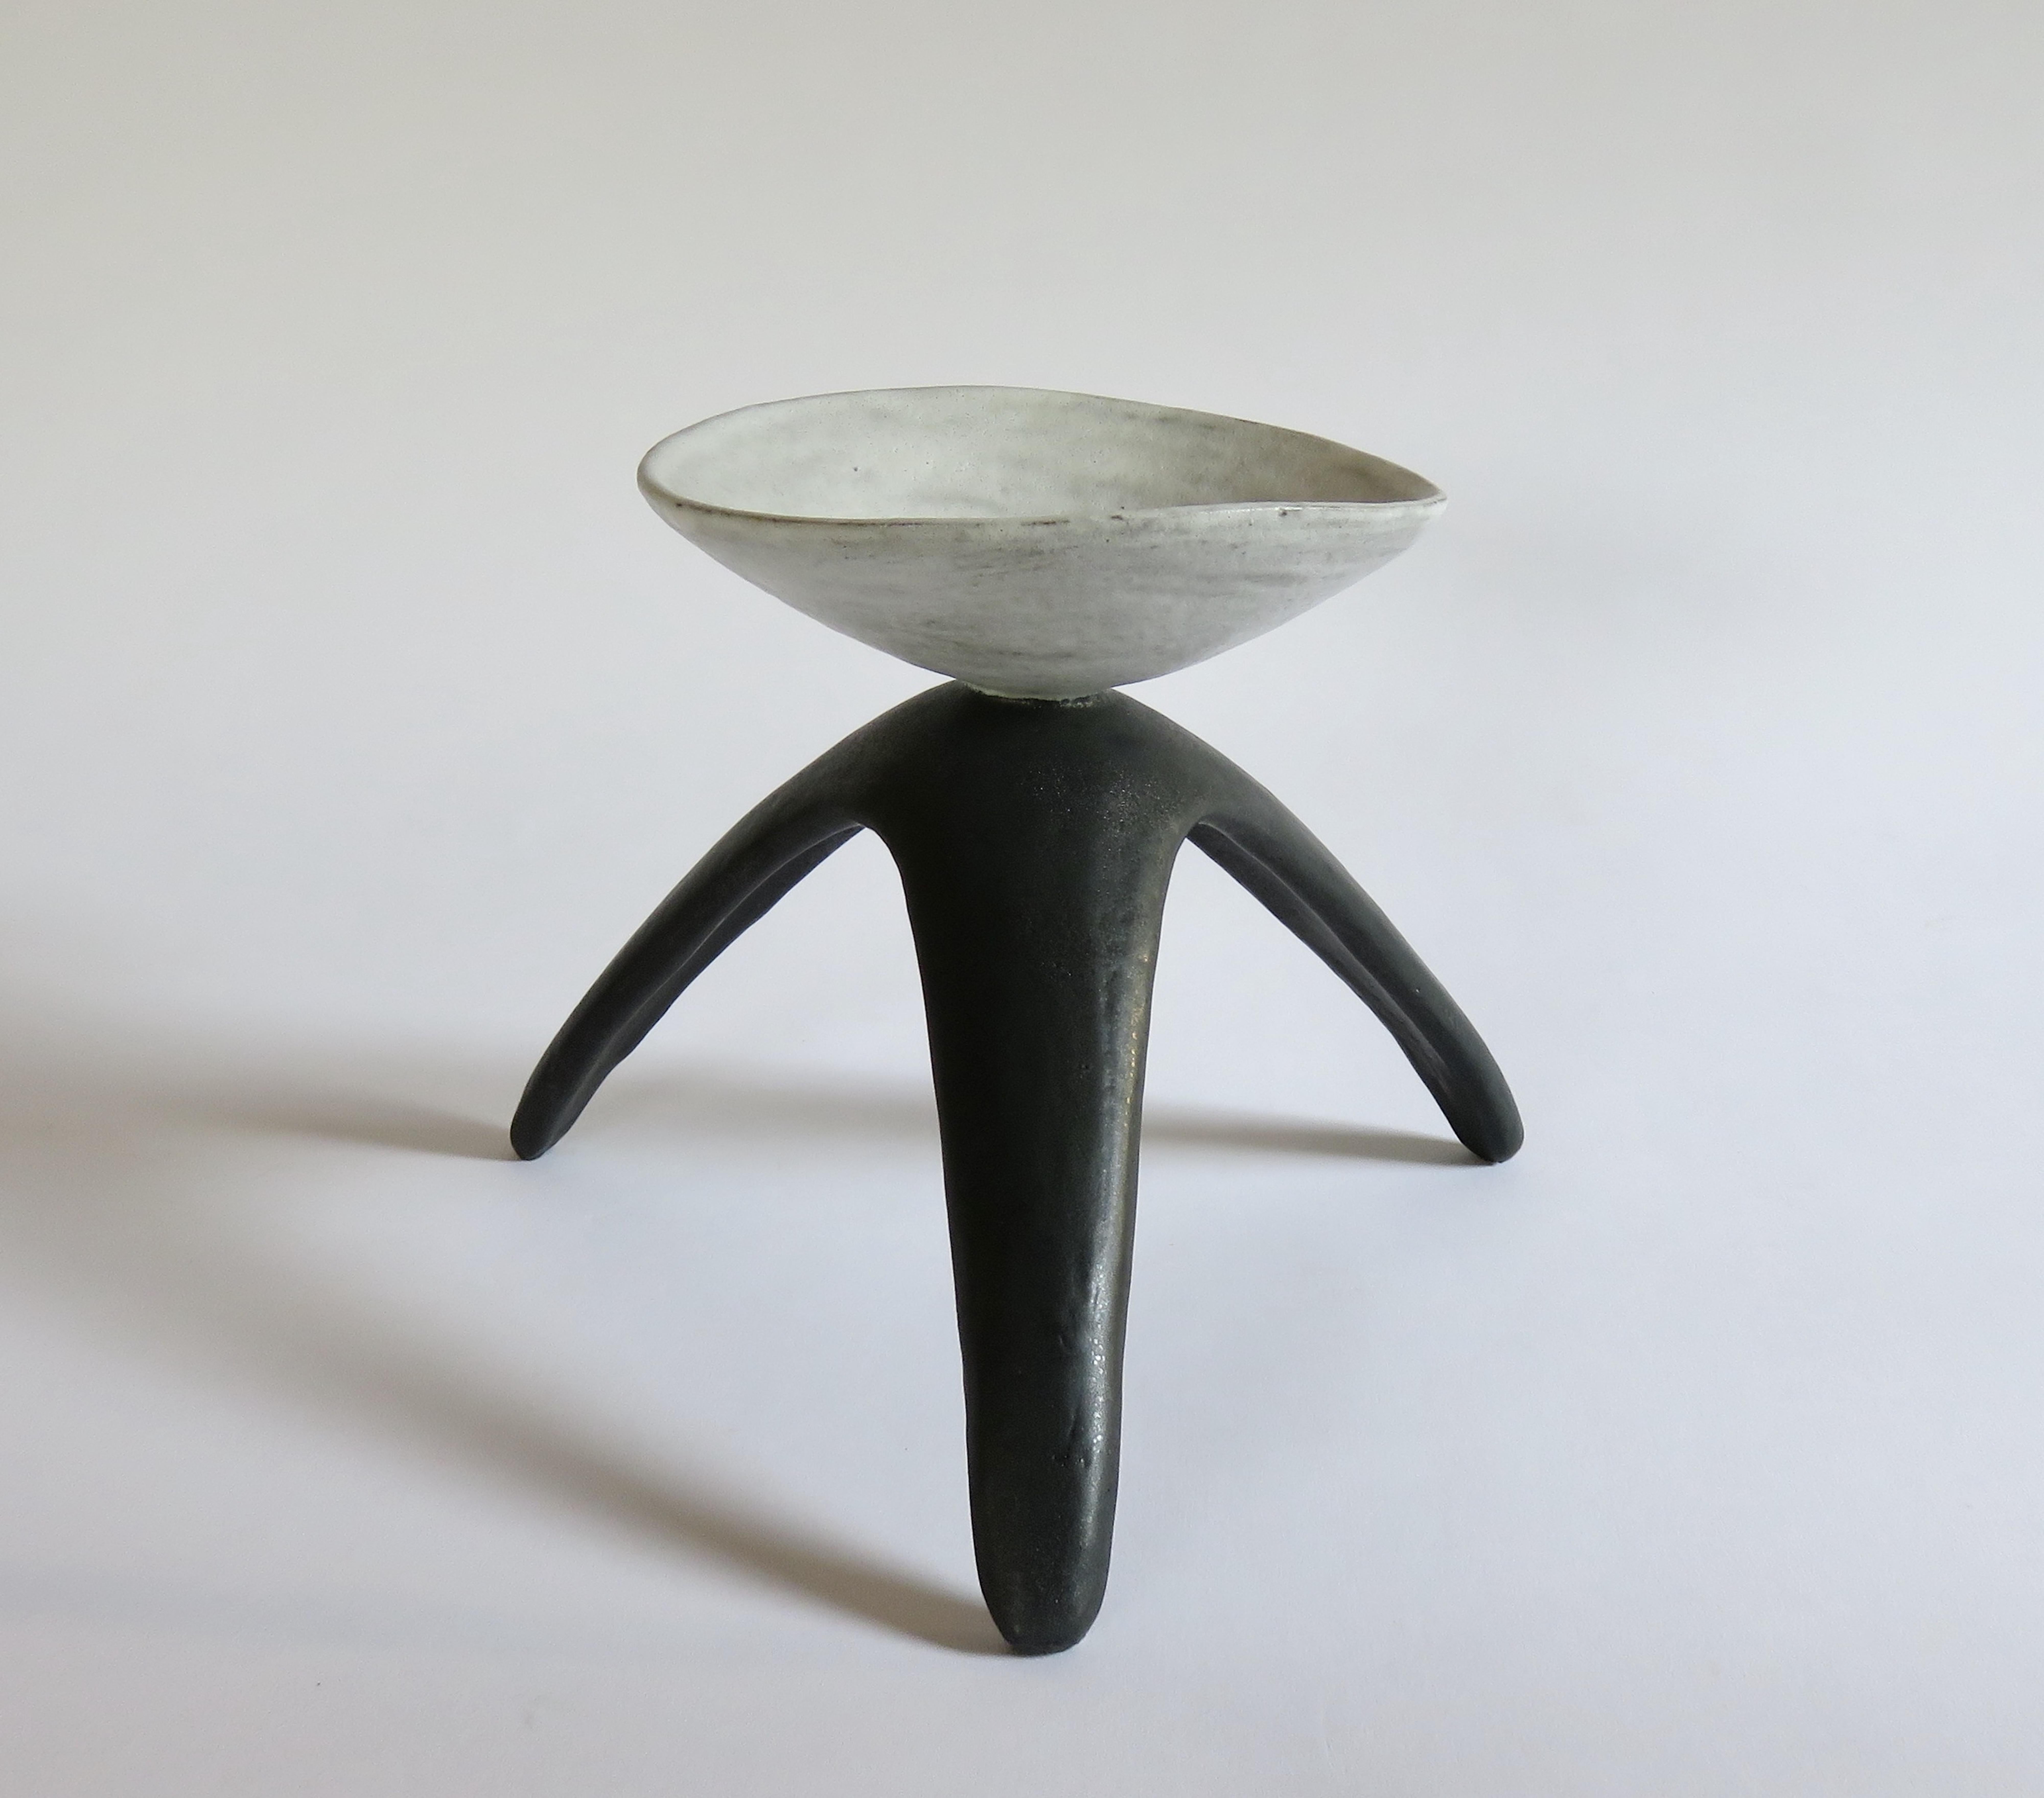 White cup chalice is a modern primitive ceramic piece, designed and hand built by the artist, Helena Starcevic. The cup has a dense white glaze over a dark clay body which adds depth to the glaze. The tripod legs have a matte black glaze with some